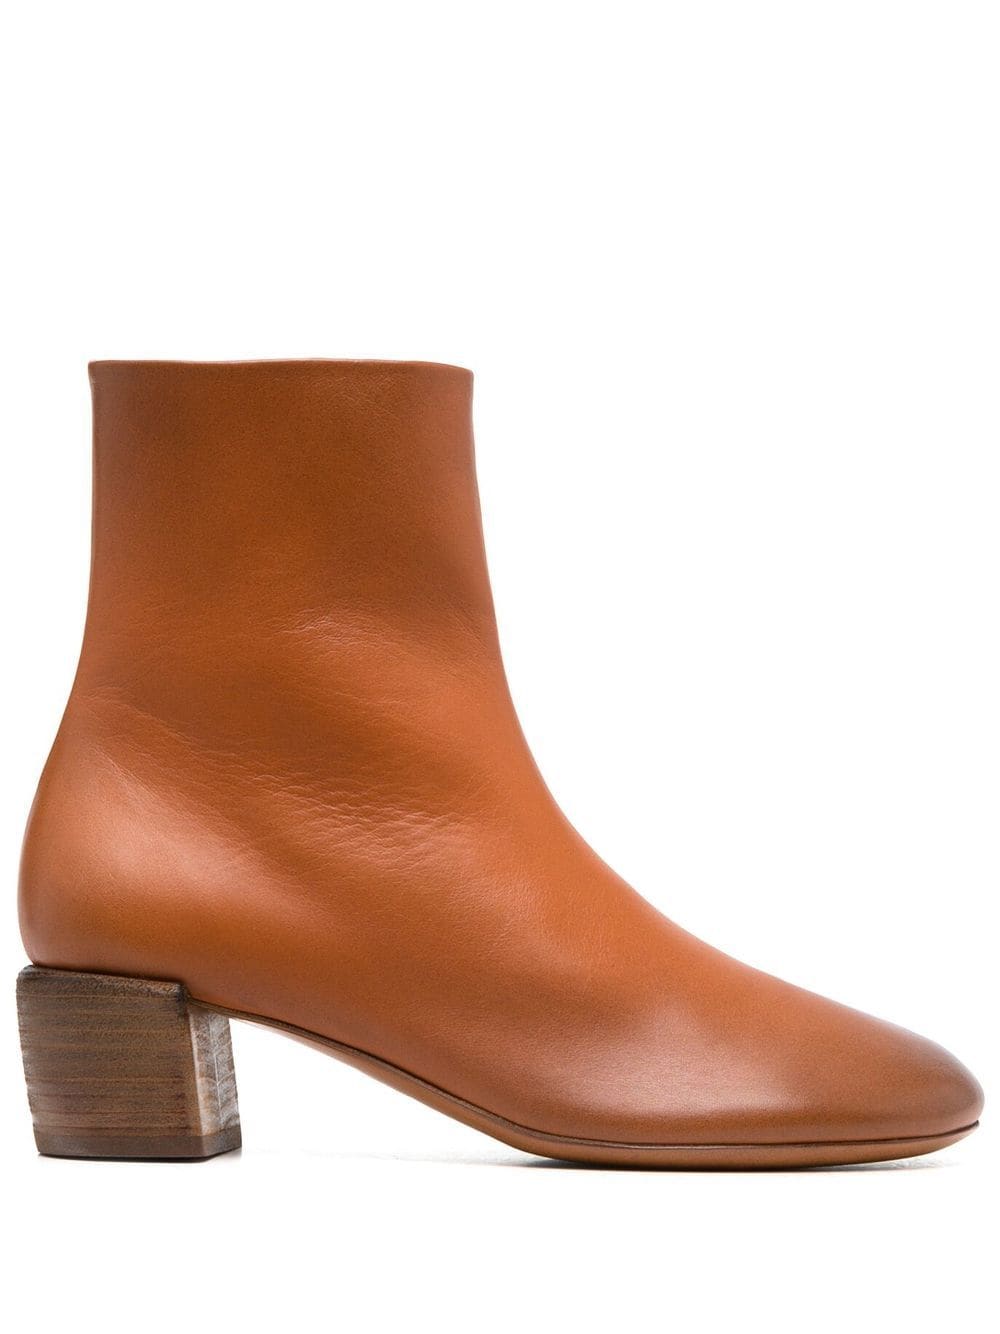 Marsèll leather ankle boots